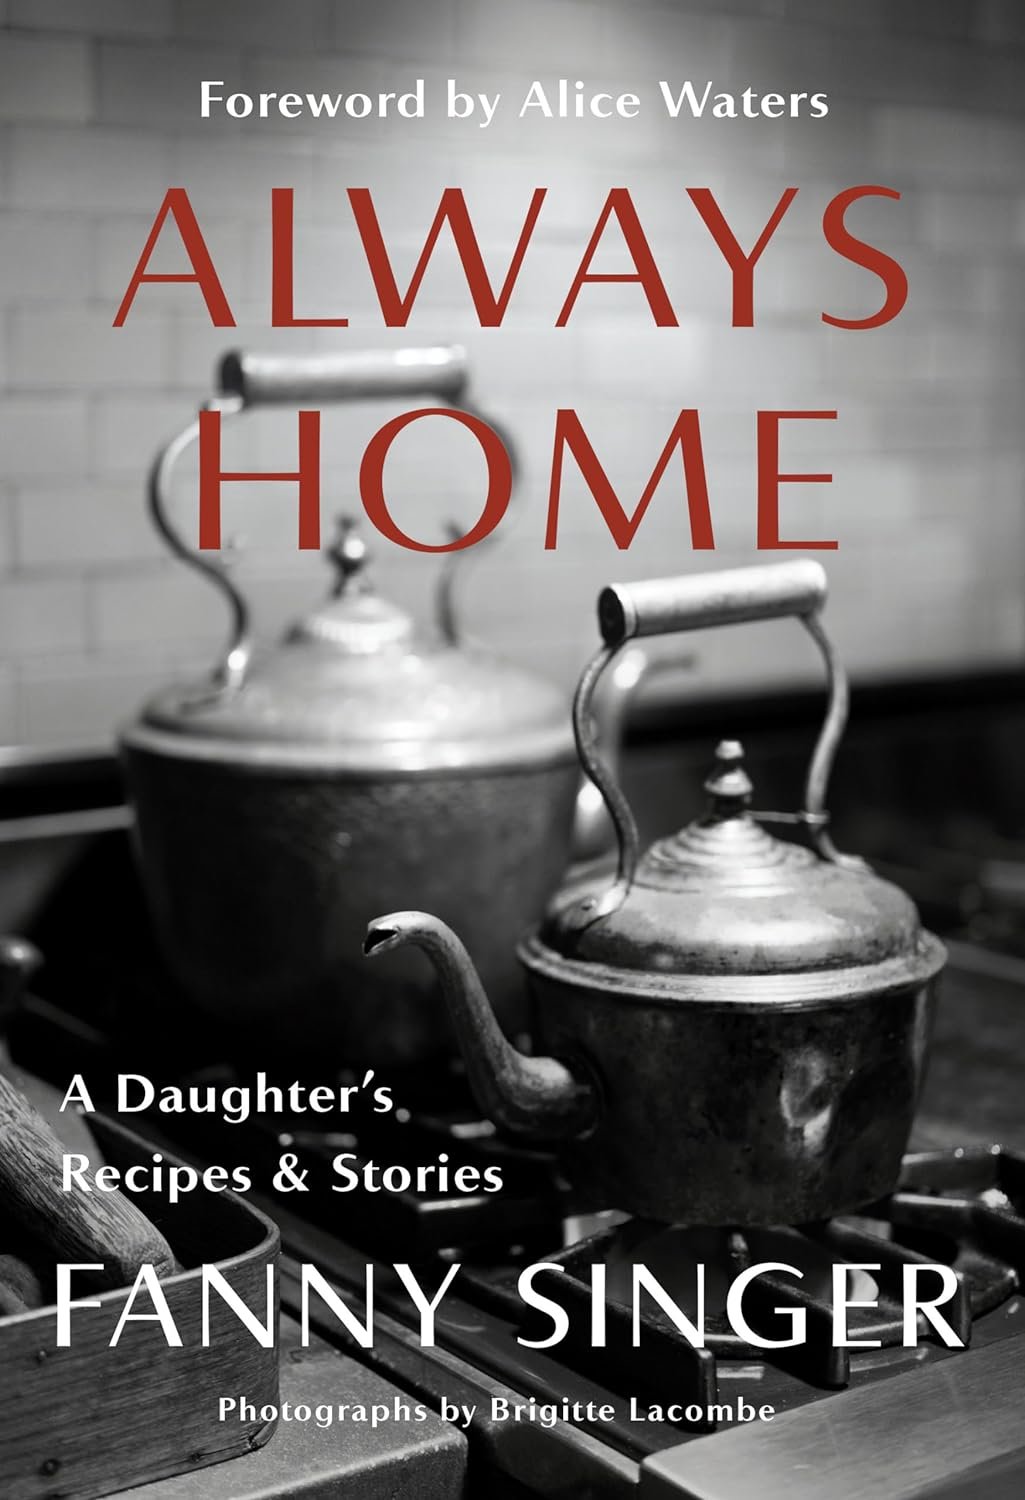 Cover of the book "Always Home: A Daughter's Recipes & Stories" by Fanny Singer (Author), a culinary memoir featuring black and white photo of teapots on a stove, with a foreword by Alice Waters. Text and photo